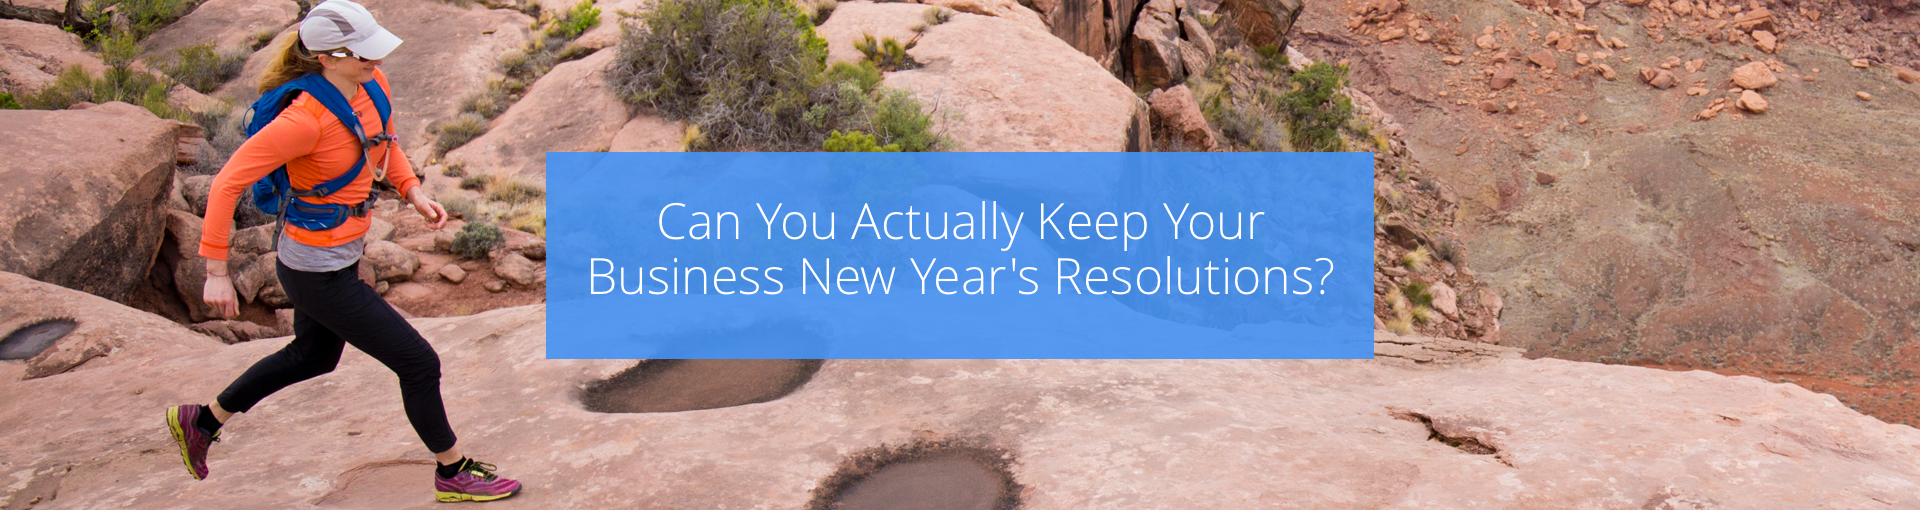 Can You Actually Keep Your Business New Year's Resolutions? Featured Image